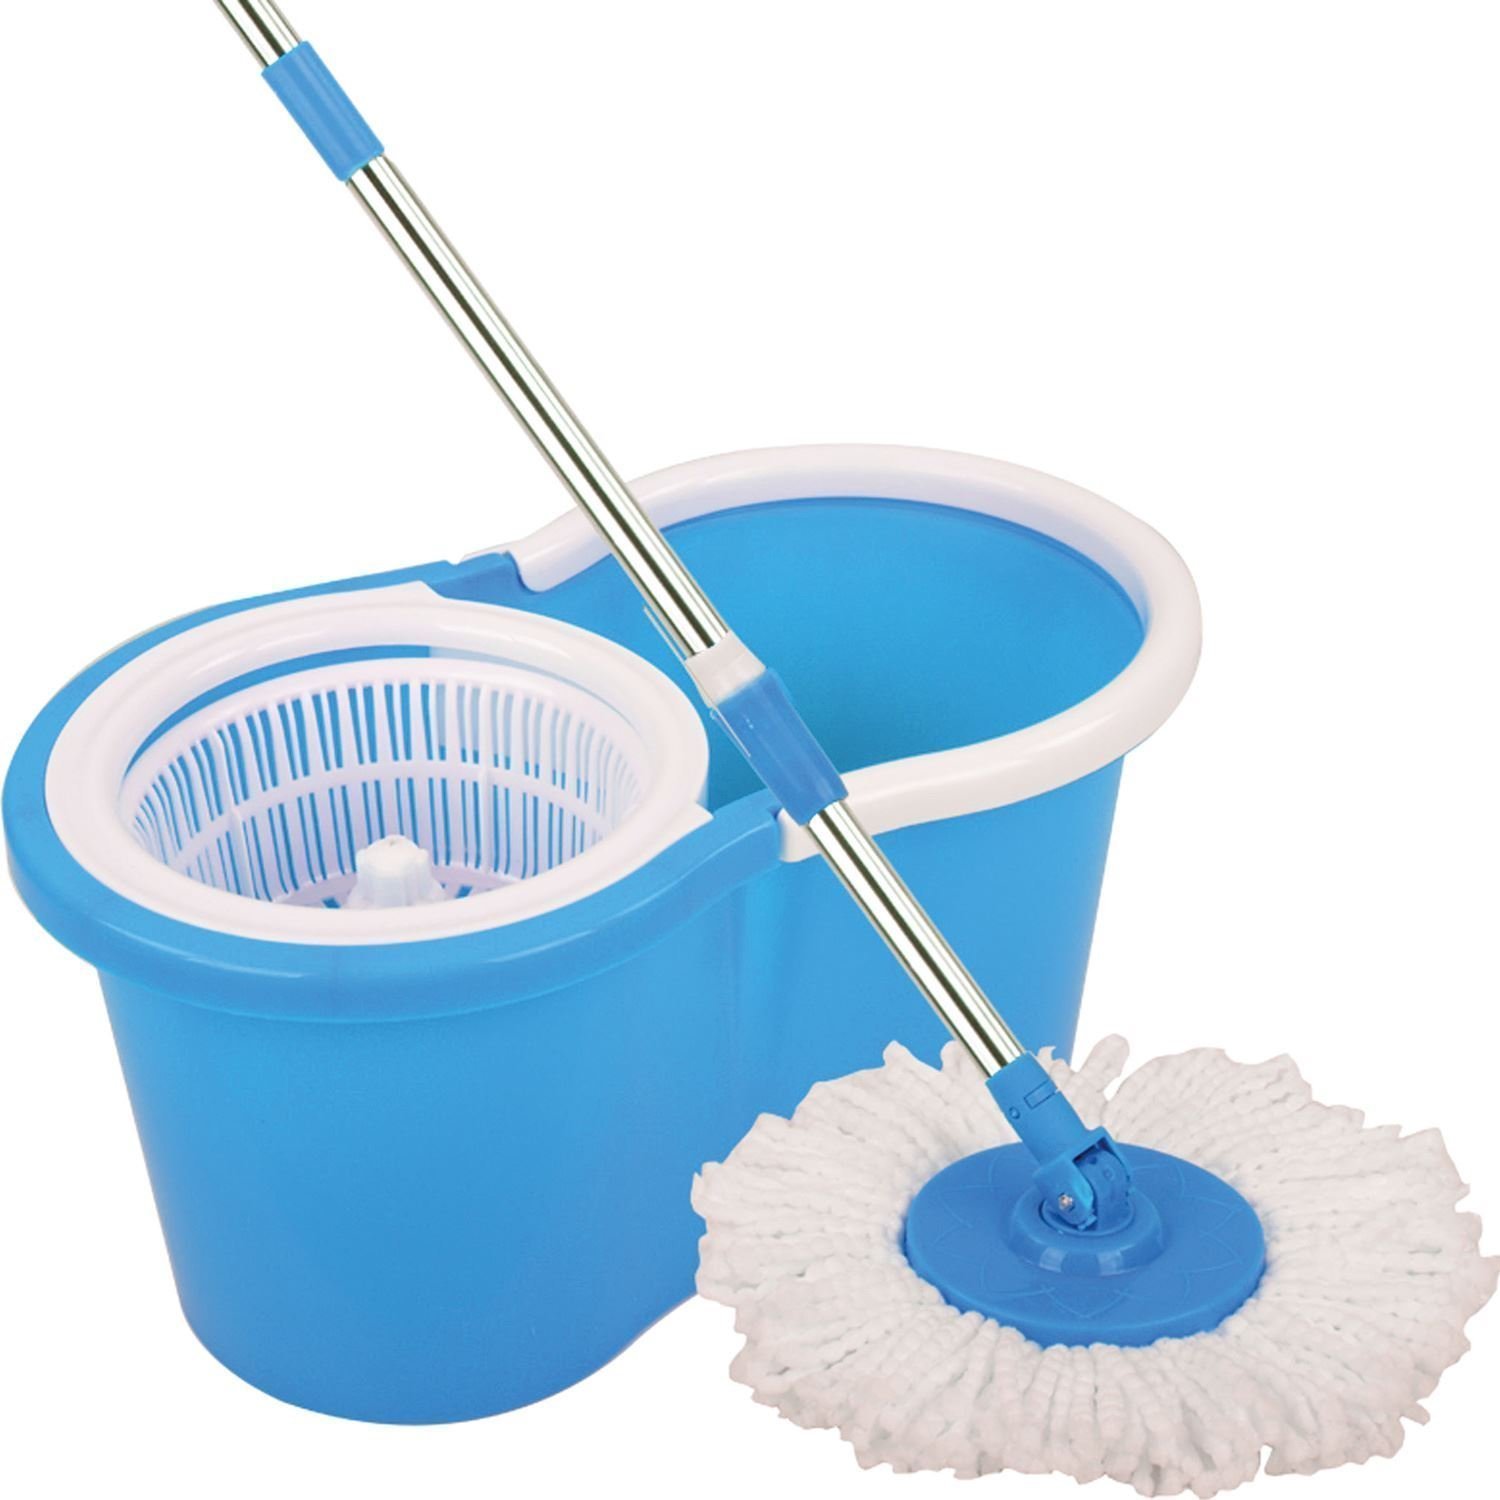 How to select The best mop for washing the floor Racing for knowledge